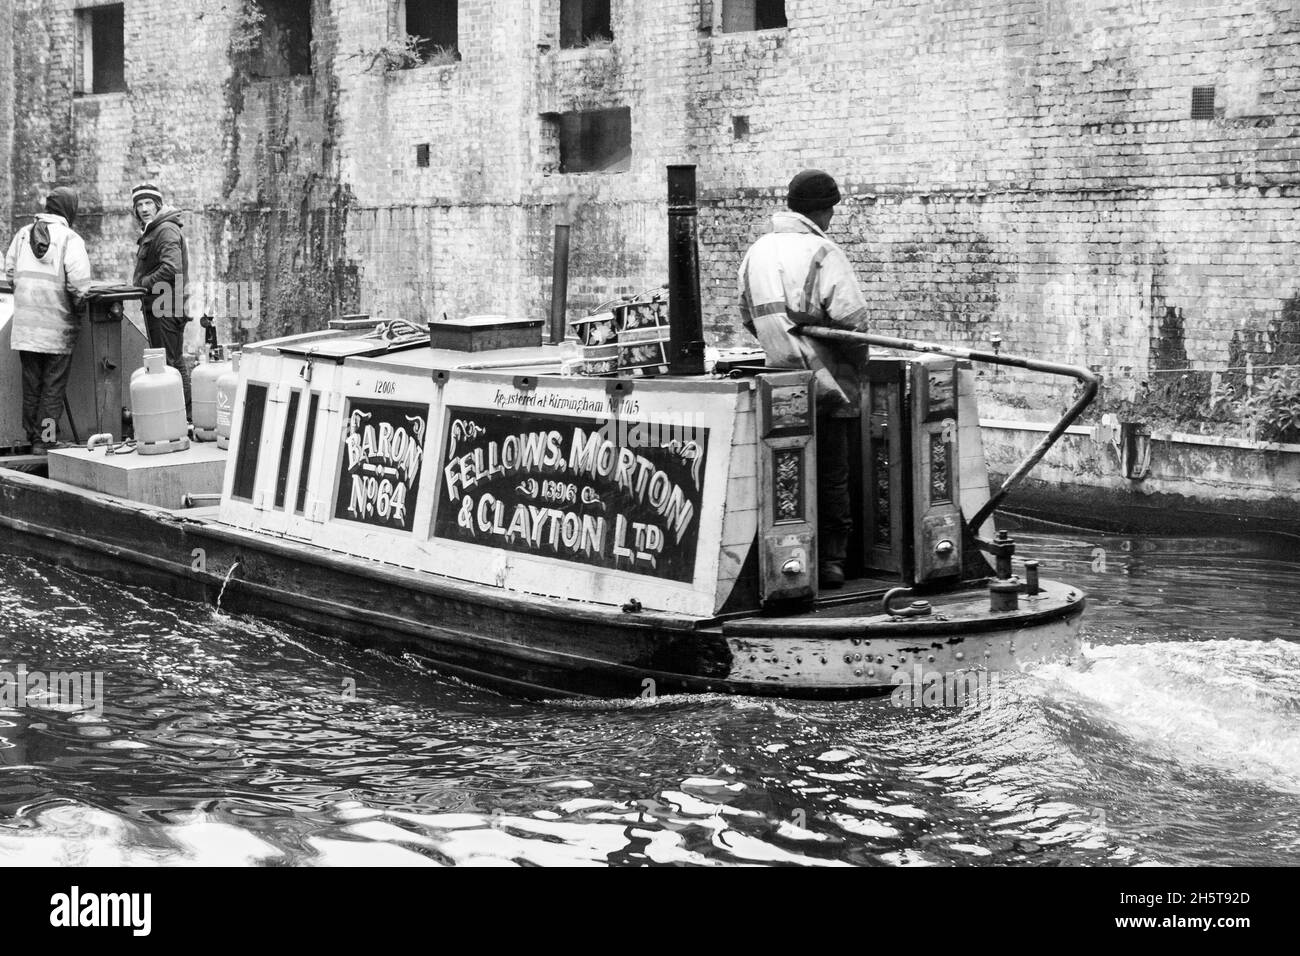 London, United Kingdom; March 16th 2011: Old barge navigating the Regent's Canal. Stock Photo